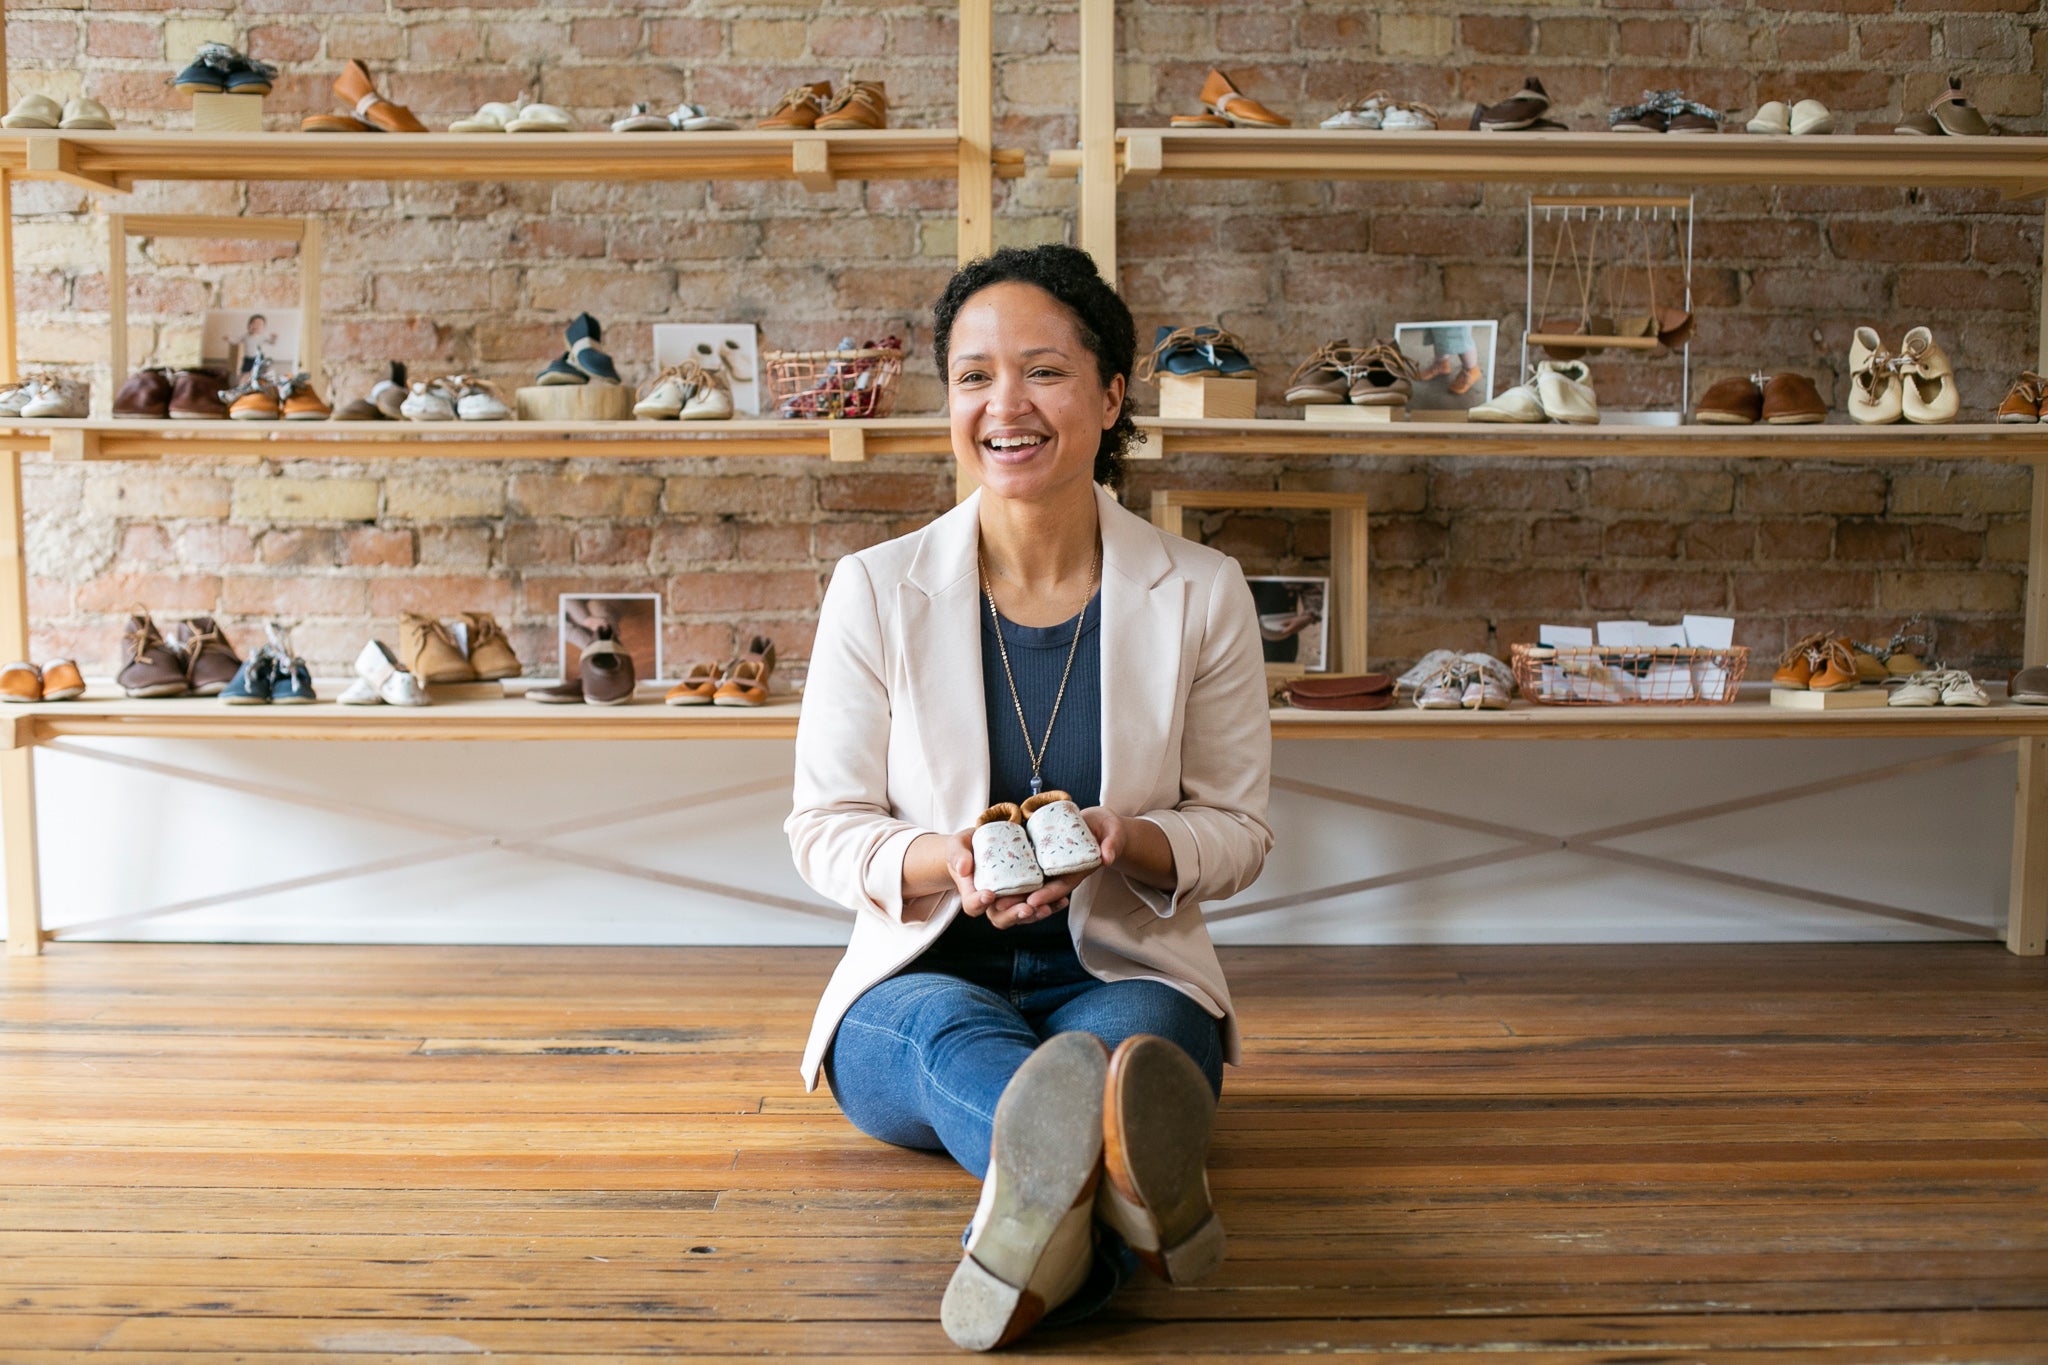 Founder of Sun & Lace sitting on floor of Stoughton Wisconsin storefront. She is holding a pair of handcrafted shoes and smiling.